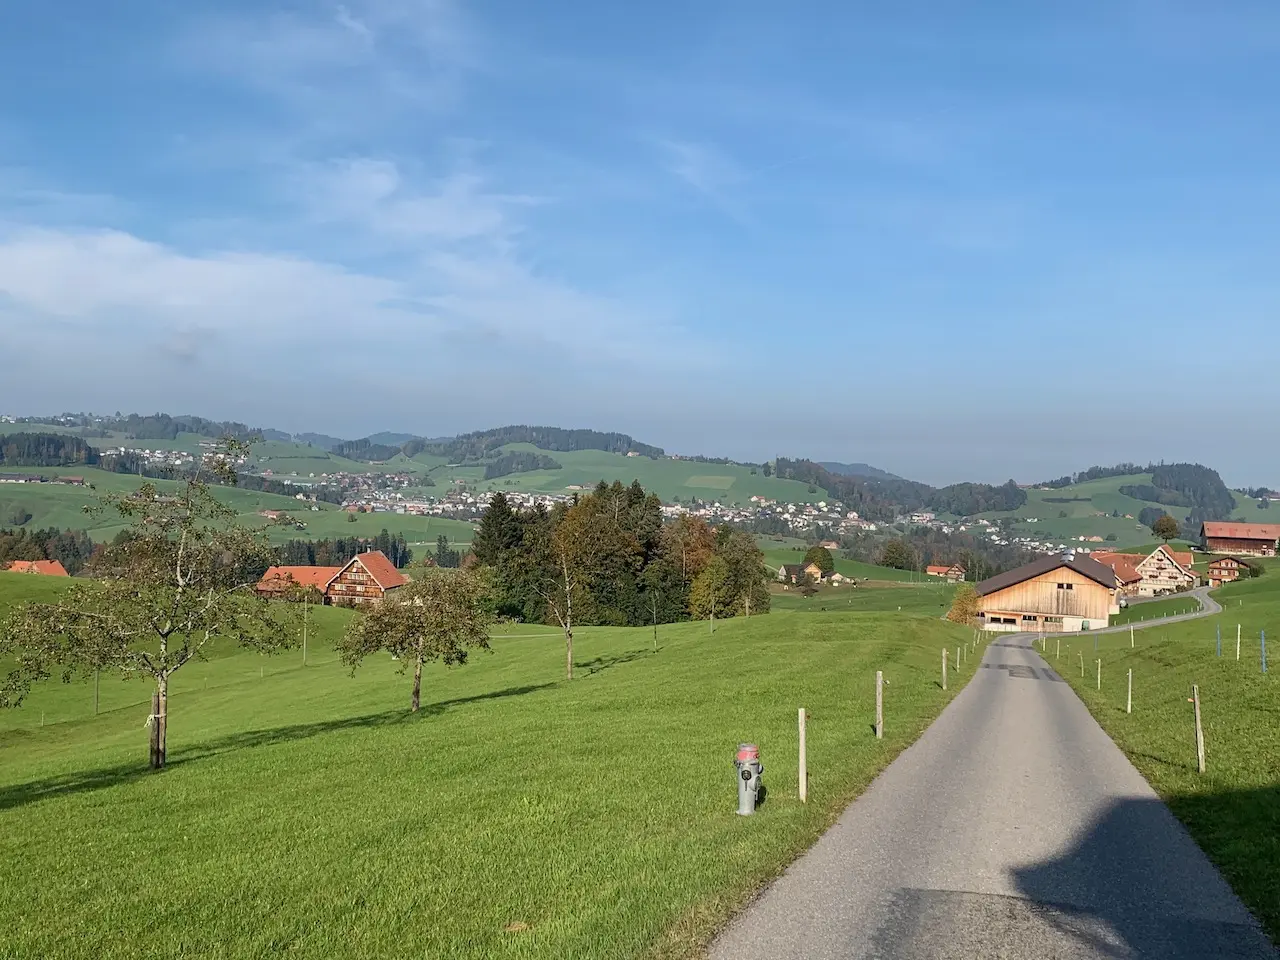 The canton of Appenzell, what a beauty!